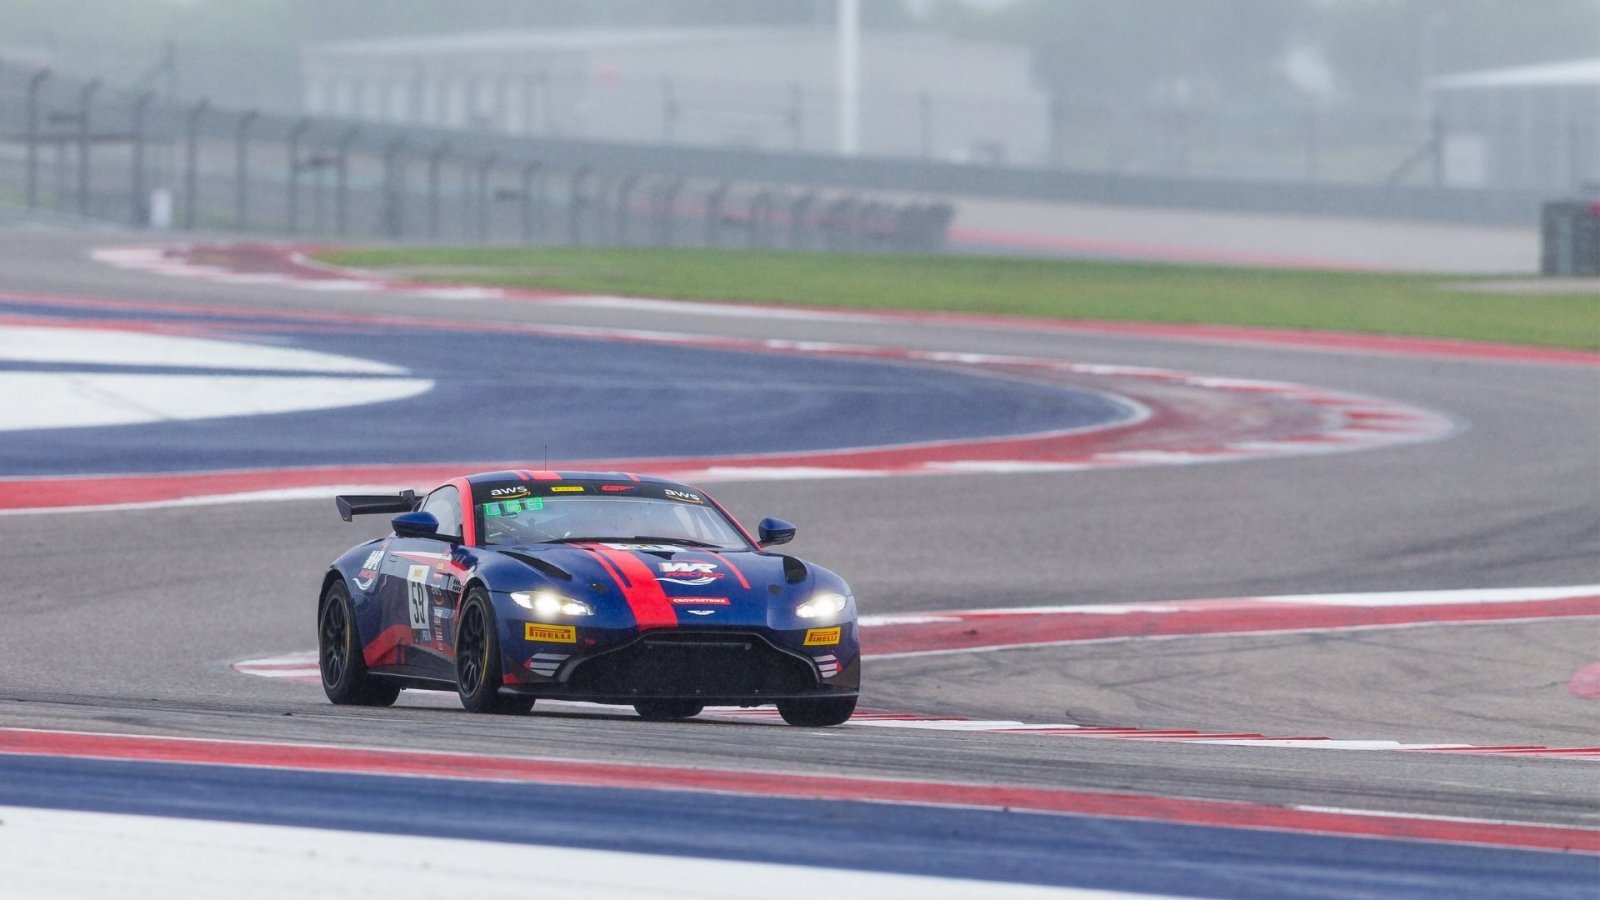 WR Racing Aston Martin Tops Practice 1 Session at COTA